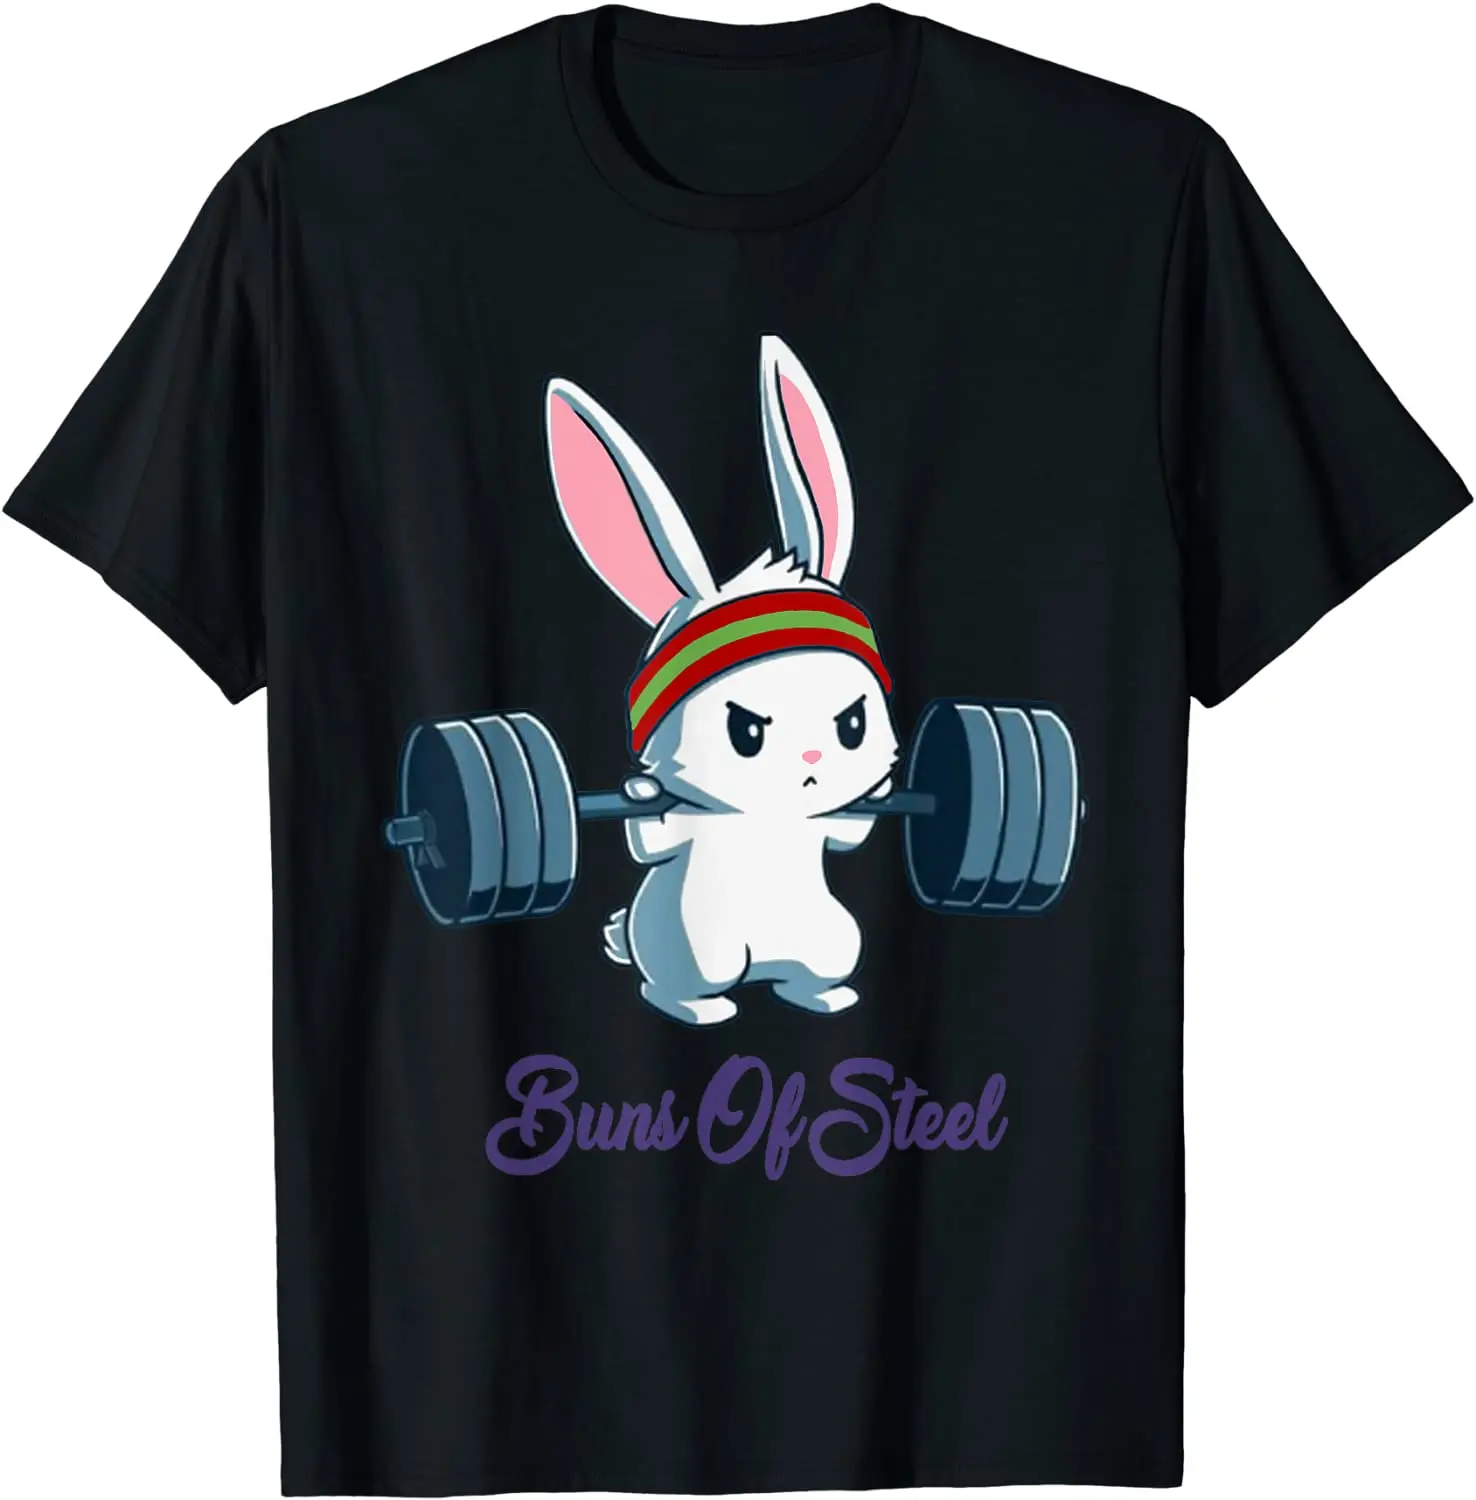 

Buns Of Steel Fitness Bunny Lover Workout T-Shirt Cotton Funny Tops Shirts Funny Men's T Shirts Personalized